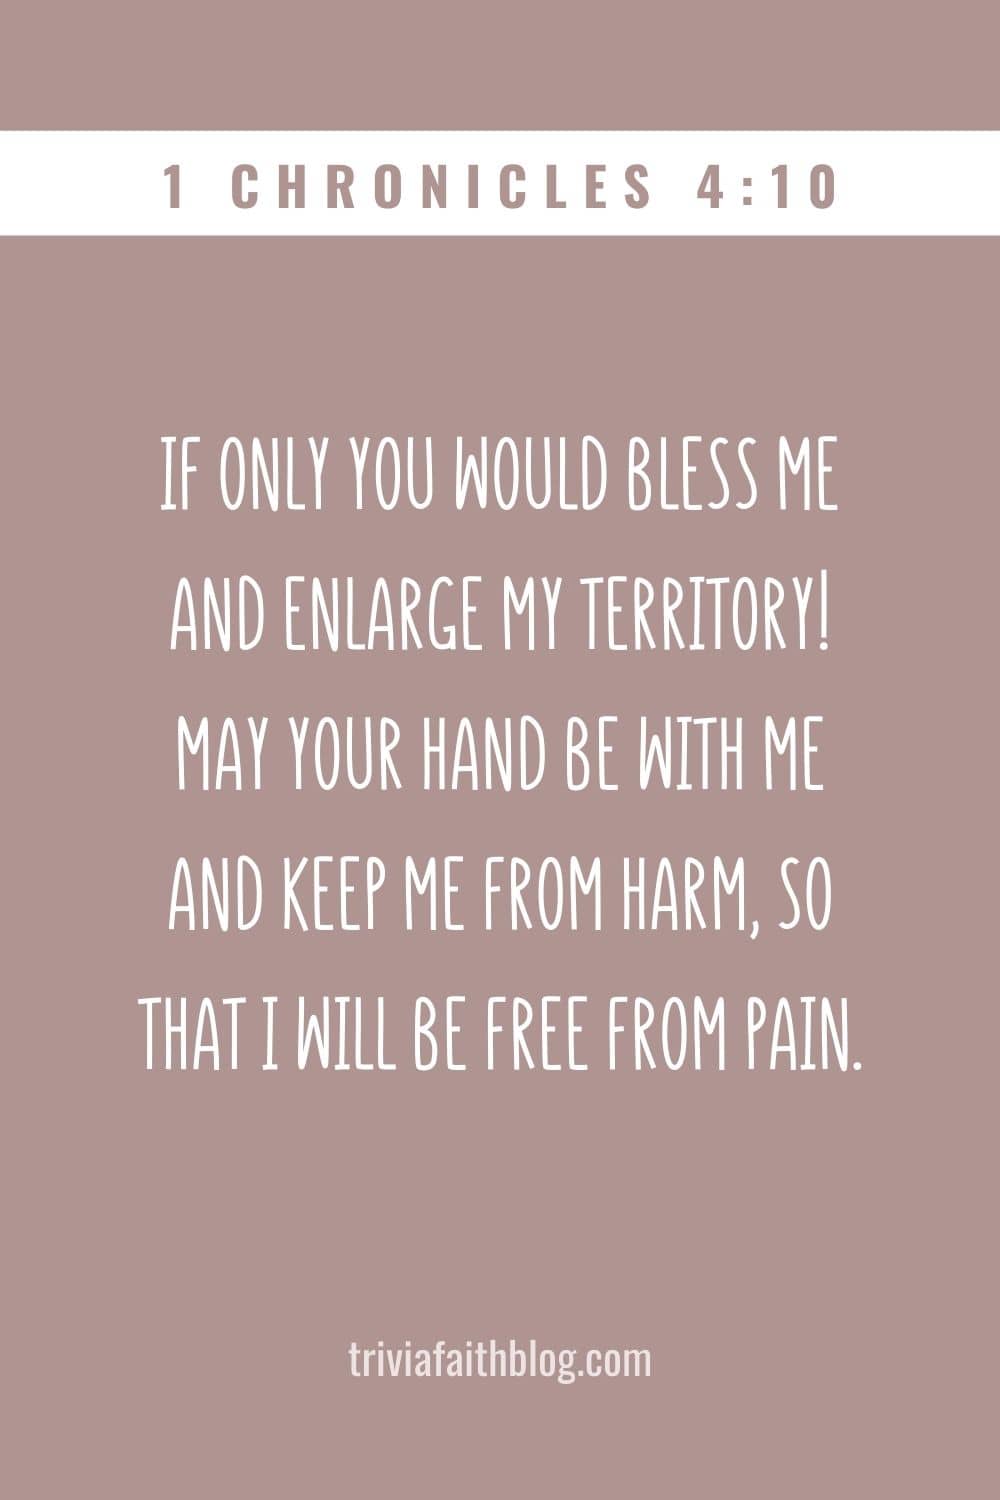 If only You would bless me and enlarge my territory! May Your hand be with me and keep me from harm, so that I will be free from pain